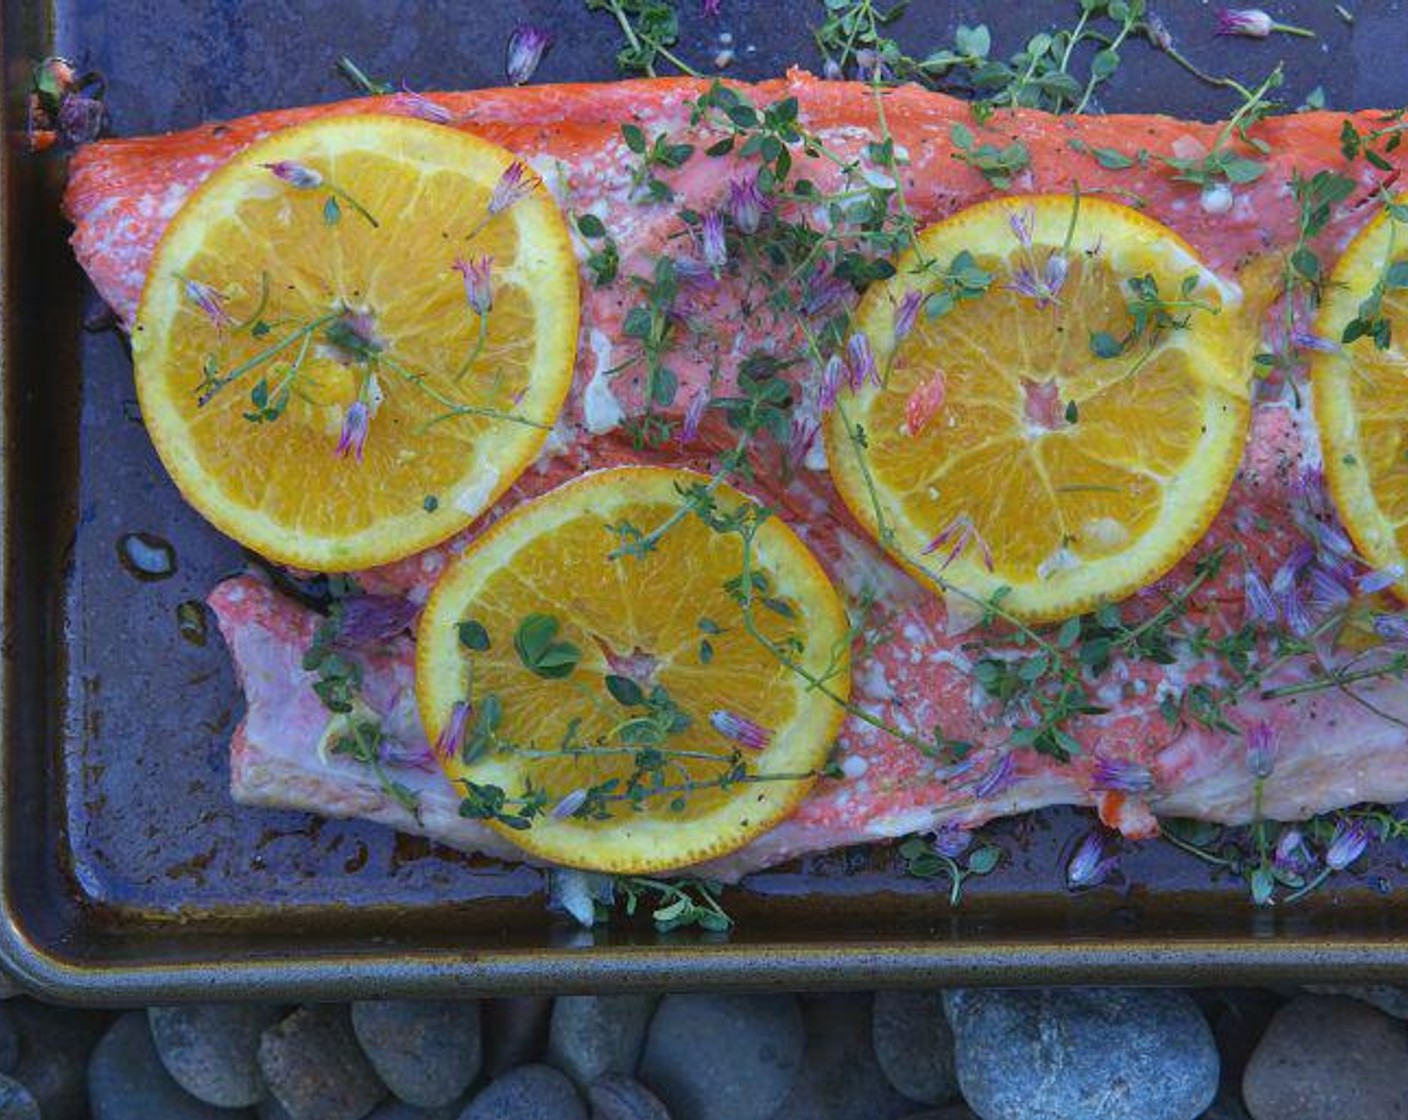 step 4 Season your Copper River Sockeye Salmon (1.5 lb) with Salt (to taste) and Ground Black Pepper (to taste). Top with your orange slices and Fresh Lemon Thyme Leaves (1 bunch). Flip your salmon onto your baking sheet so it is skin-side up with the orange slices under the salmon.